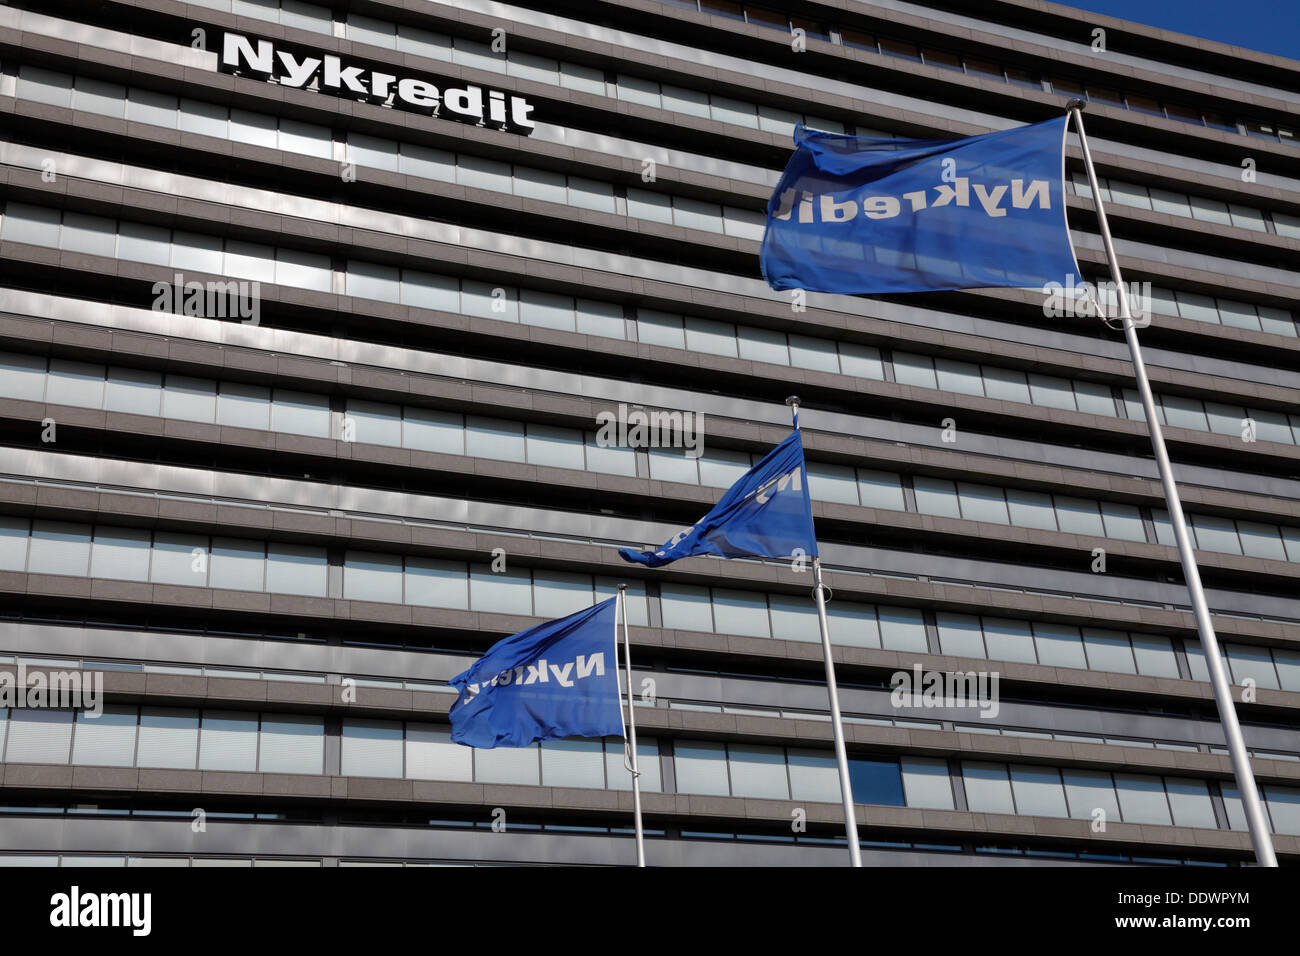 Headquarters of the Nykredit group, bank and mortgage-credit institute, at Kalvebod Brygge in Copenhagen, Denmark. Stock Photo